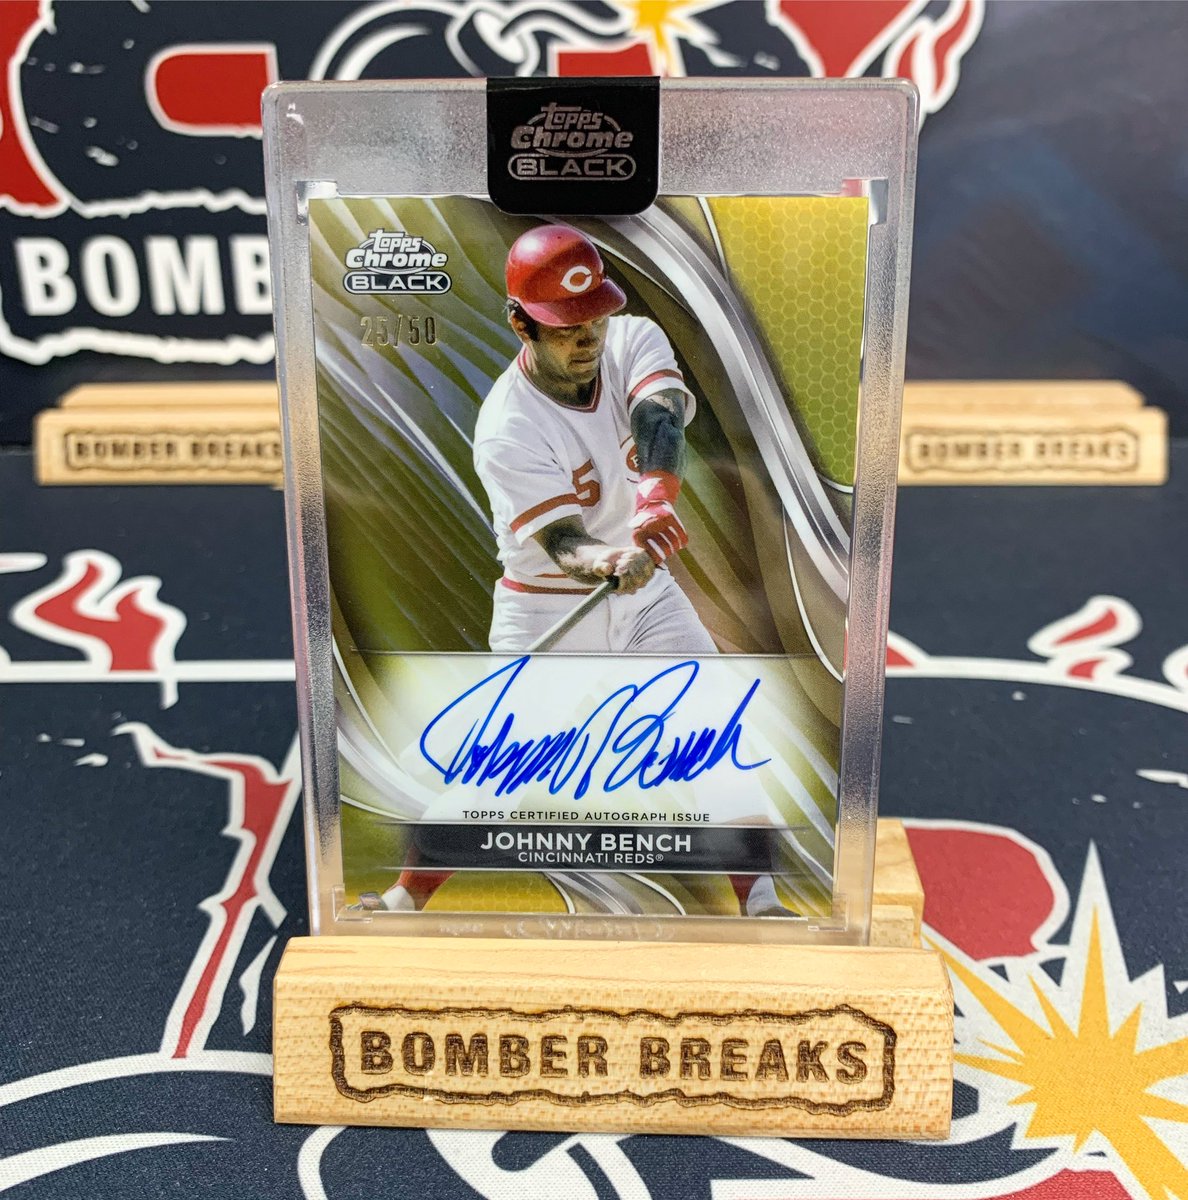 Johnny Bench /50 Gold Refractor On-Card Auto with a beautiful pull for the Reds in @topps Chrome Black!
🔥🔥 @fanatics #baseballcards #cincinnatireds #reds #mlb #autograph #johnnybench #groupbreaks #thehobby #boxbreaks #casebreaks #boom #tradingcards #toppschrome